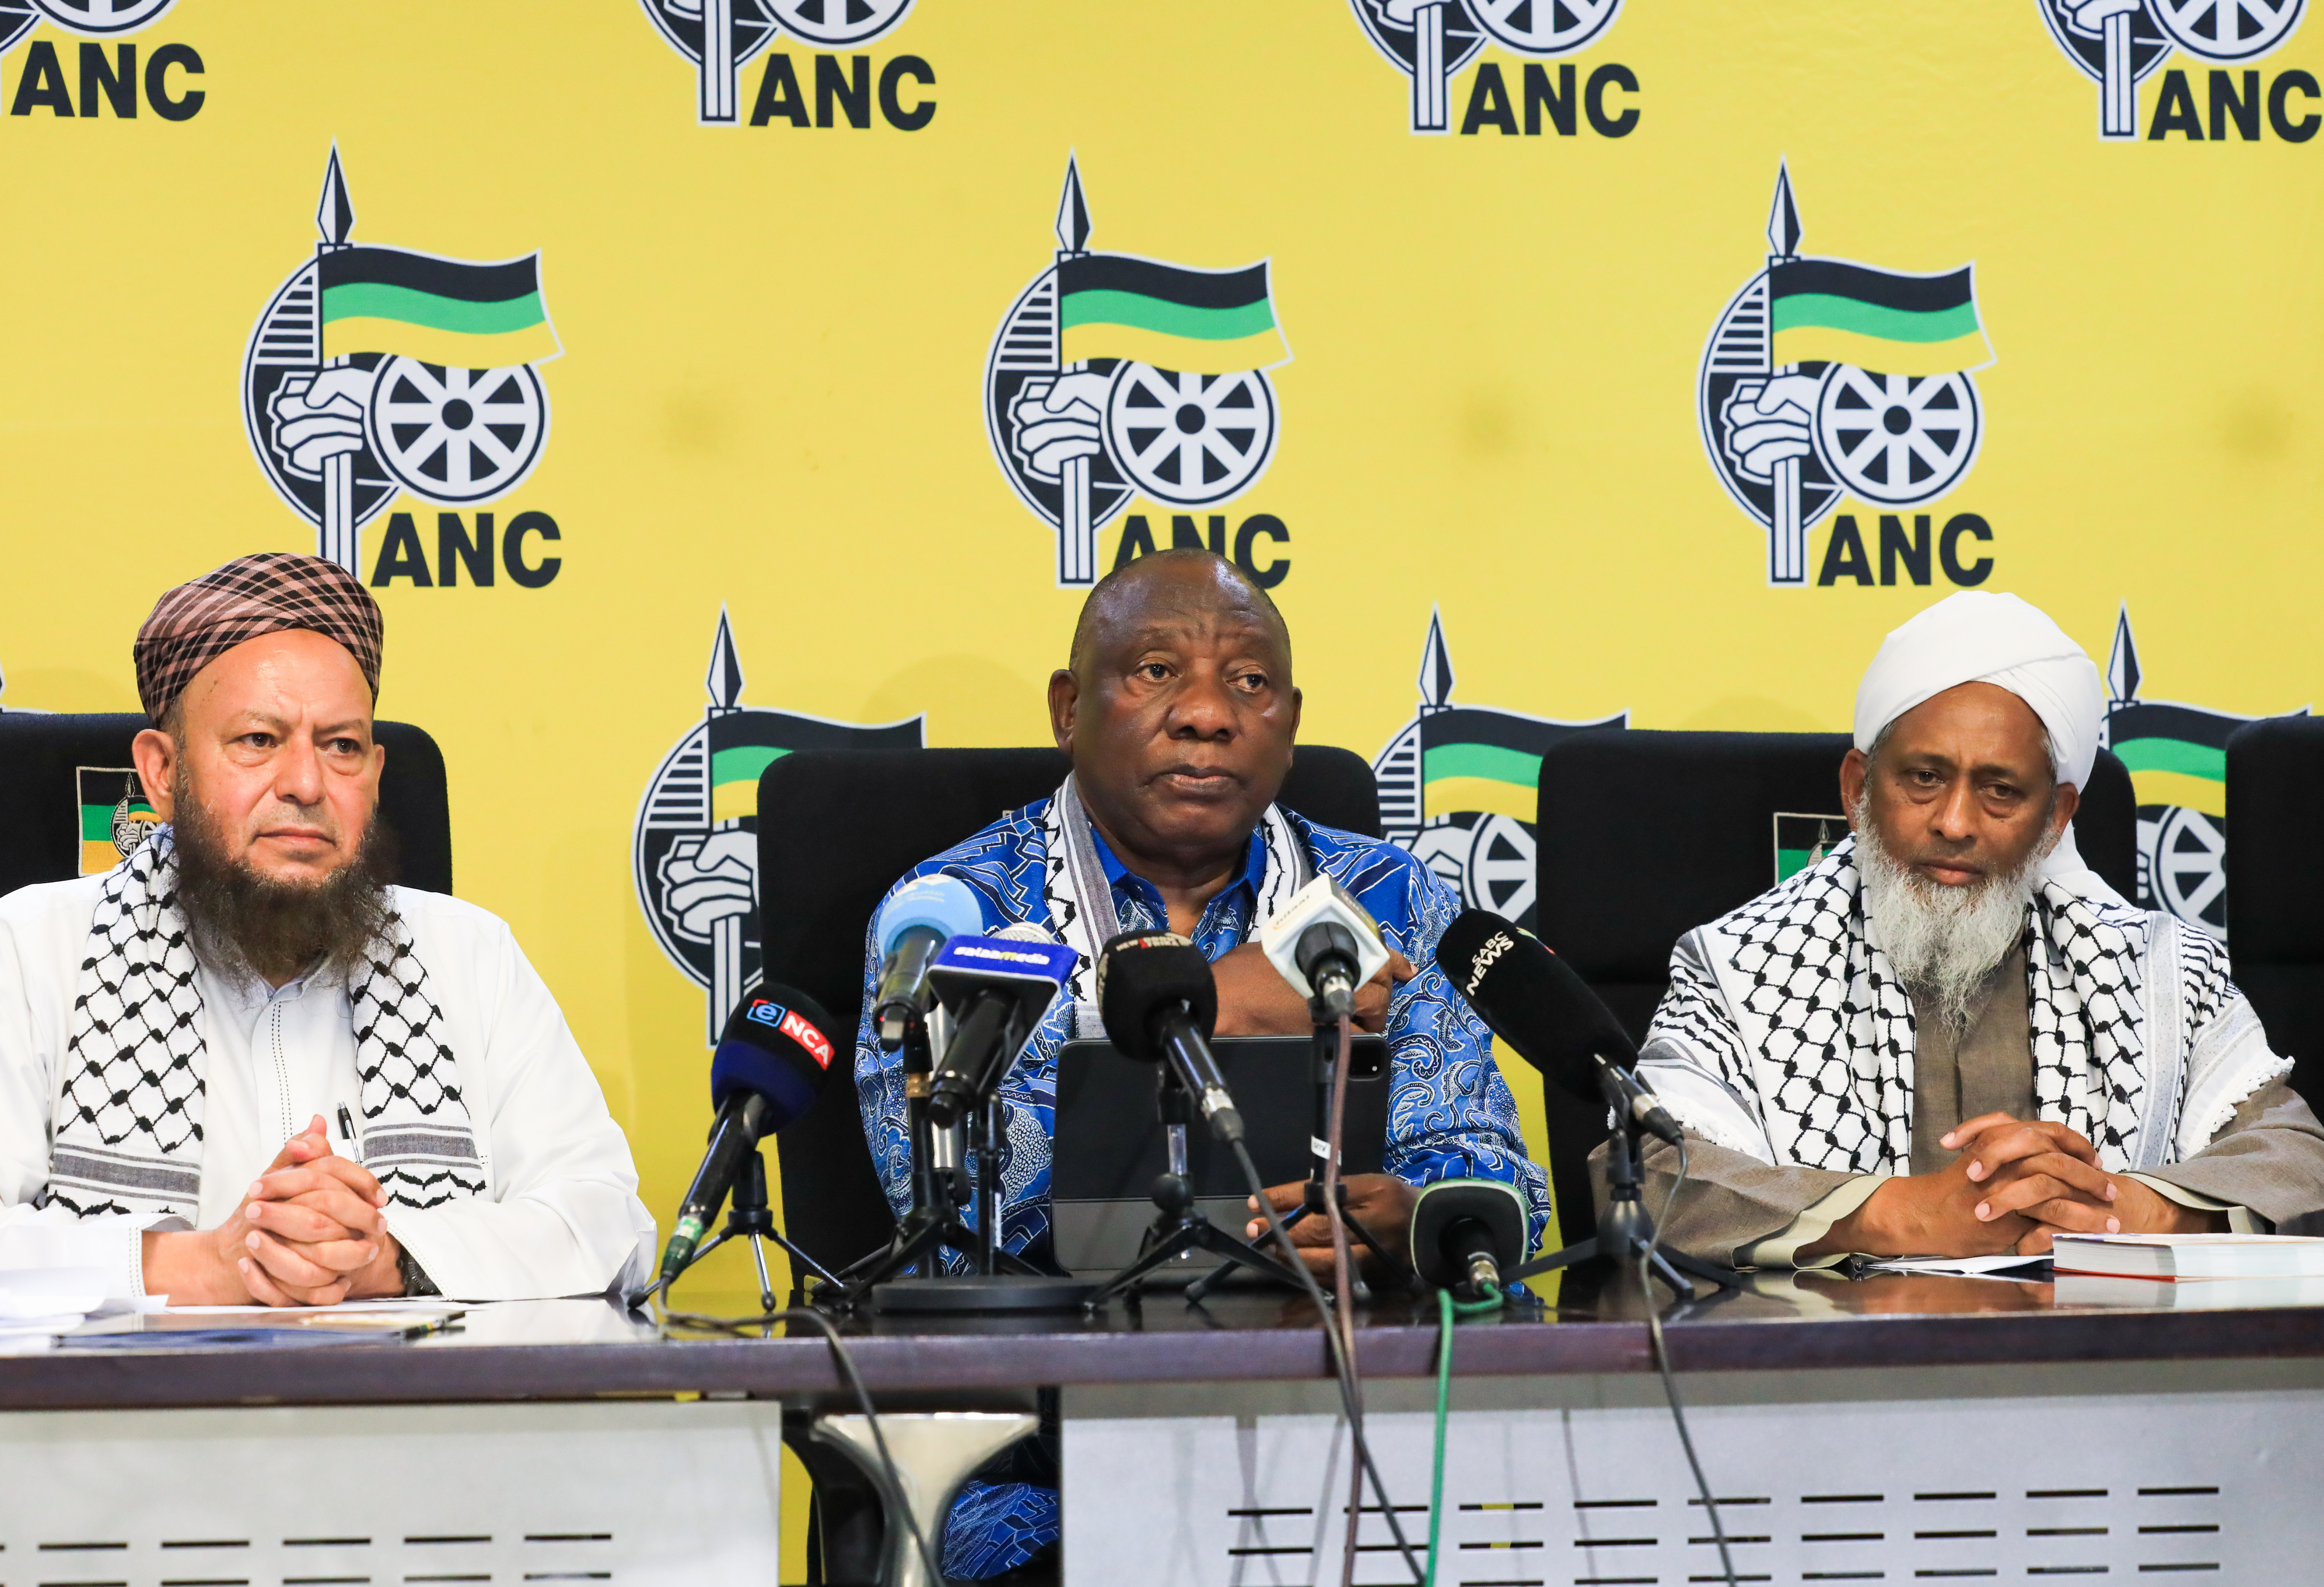 South African President Ramaphosa Meets With Organisations Supporting The Liberation Of Palestine